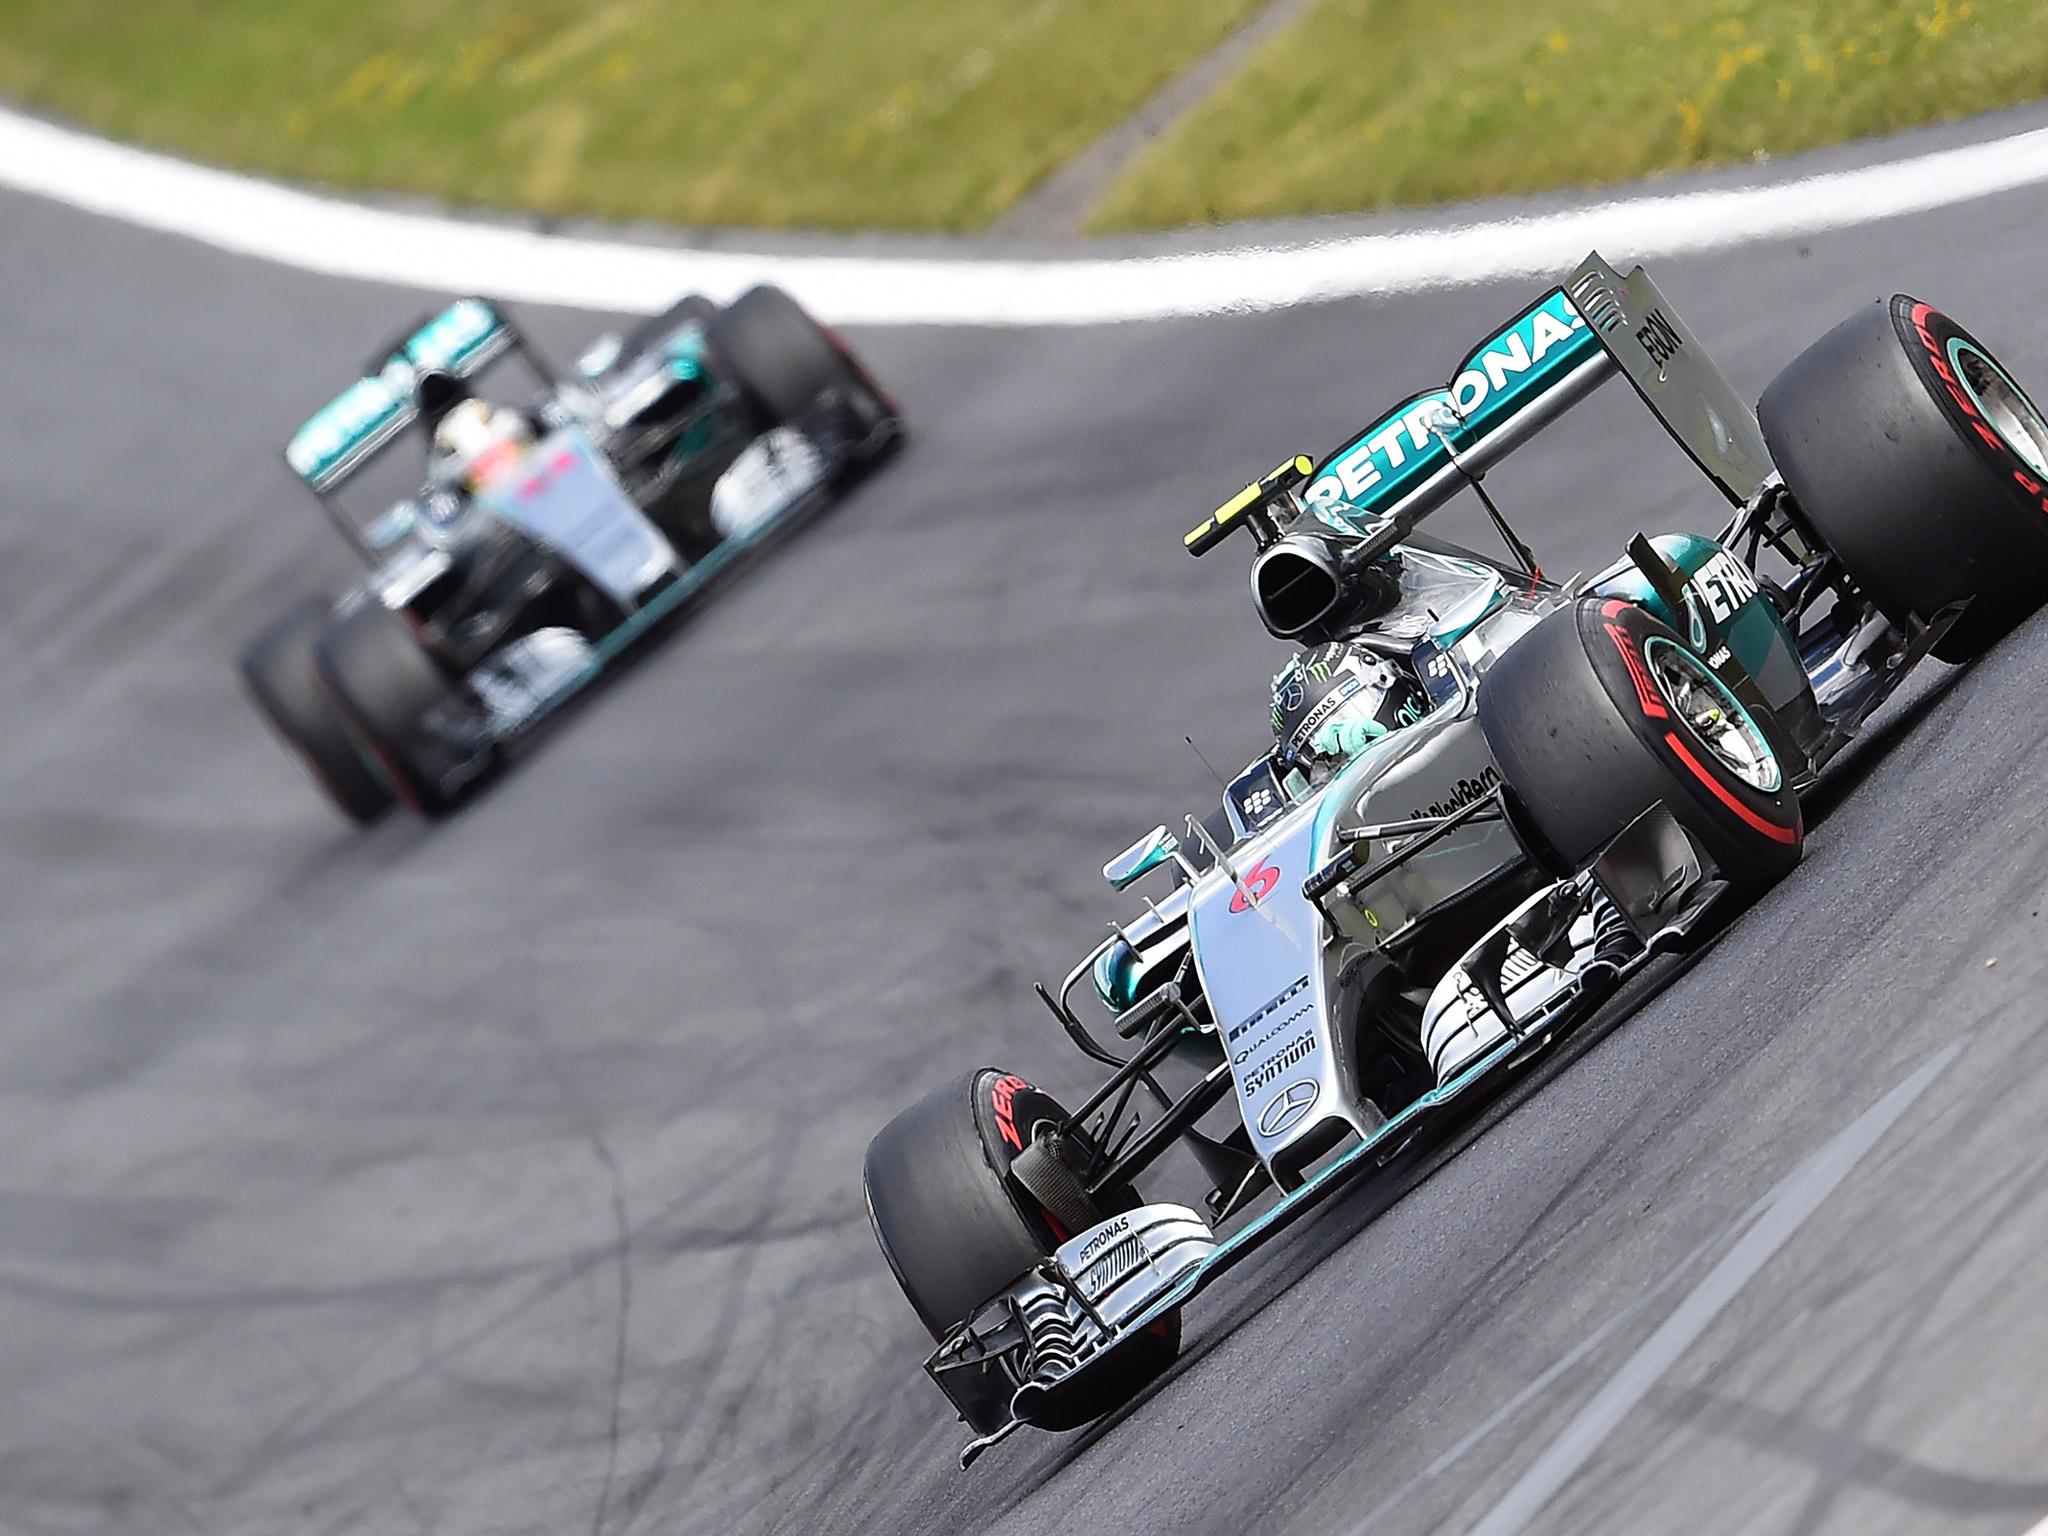 Rosberg set a new fastest lap around the Red Bull Ring